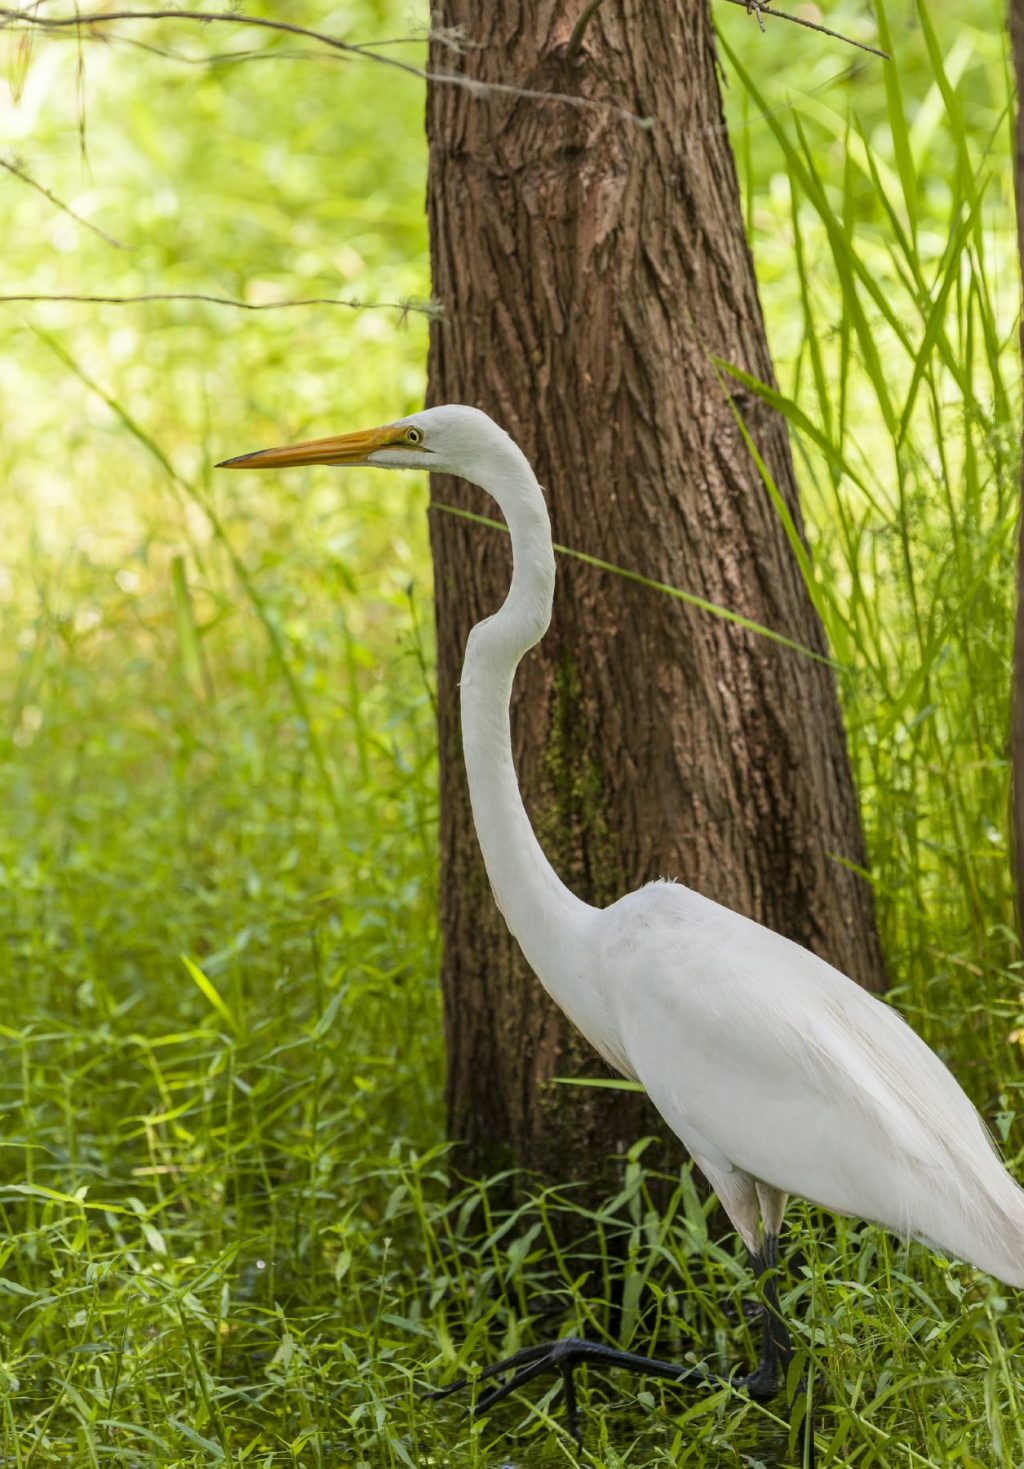 Great egret in front of a bald cypress tree wading through grass